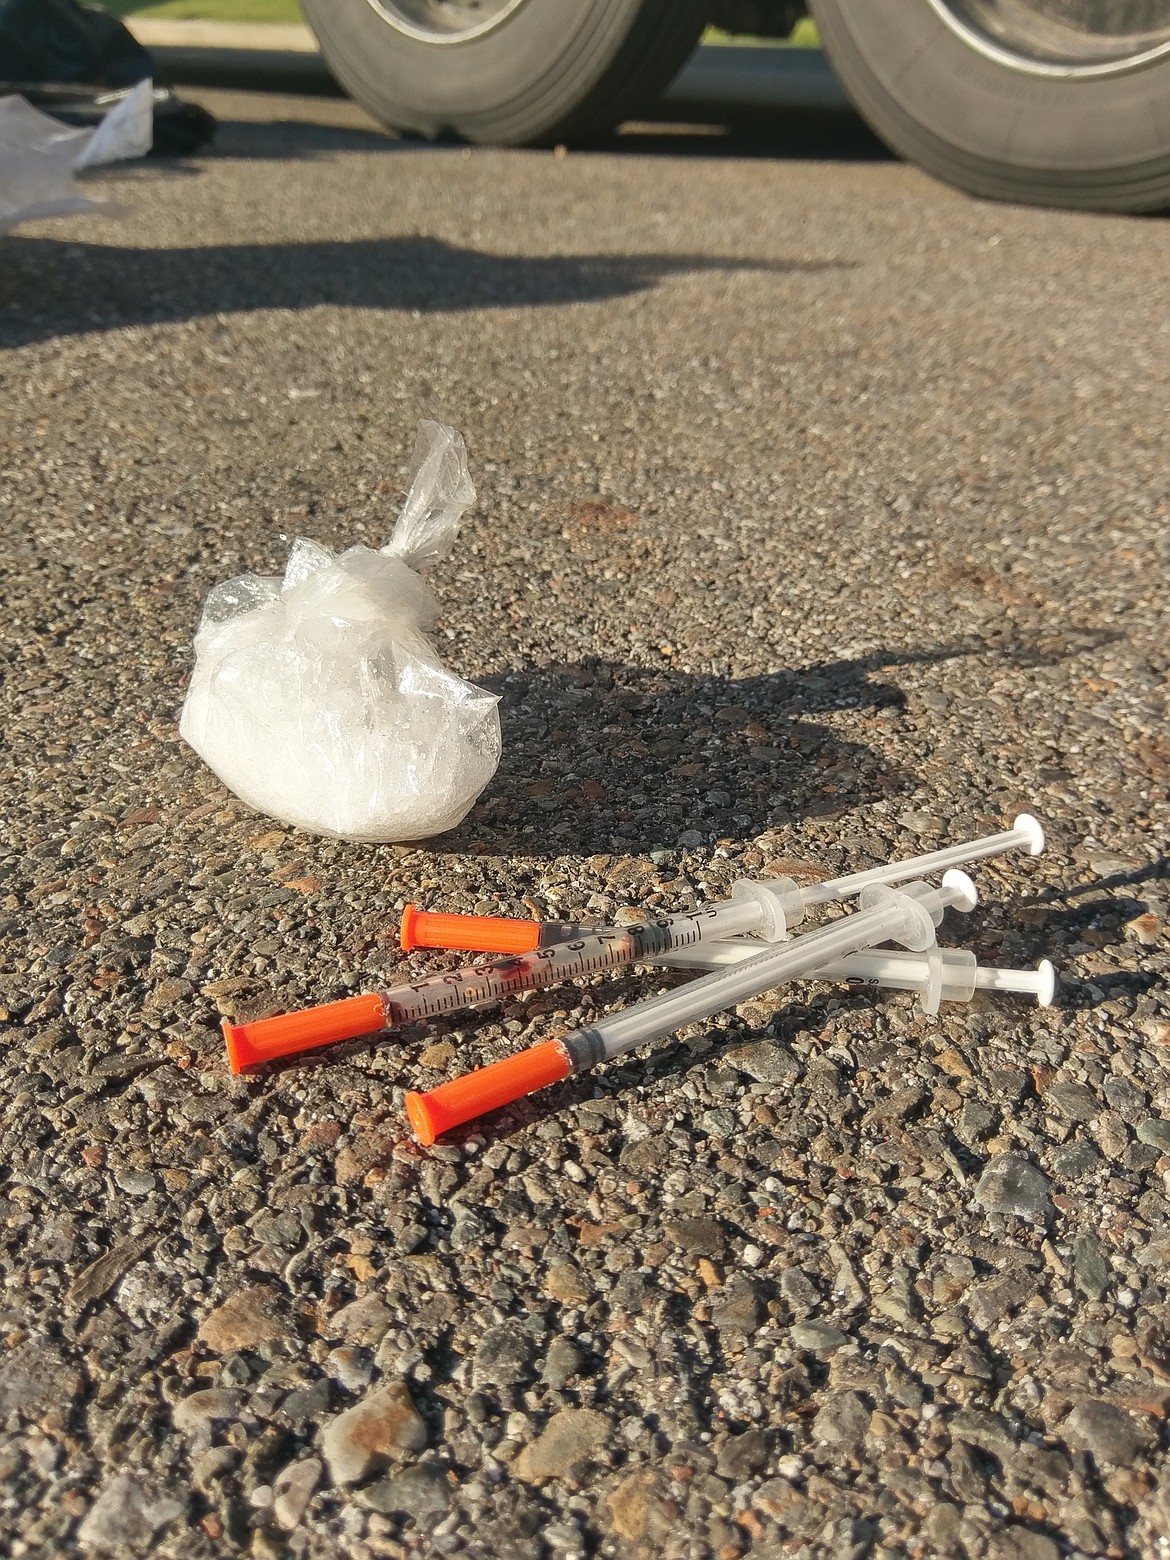 A closer look at the seized methamphetamine with used syringes.